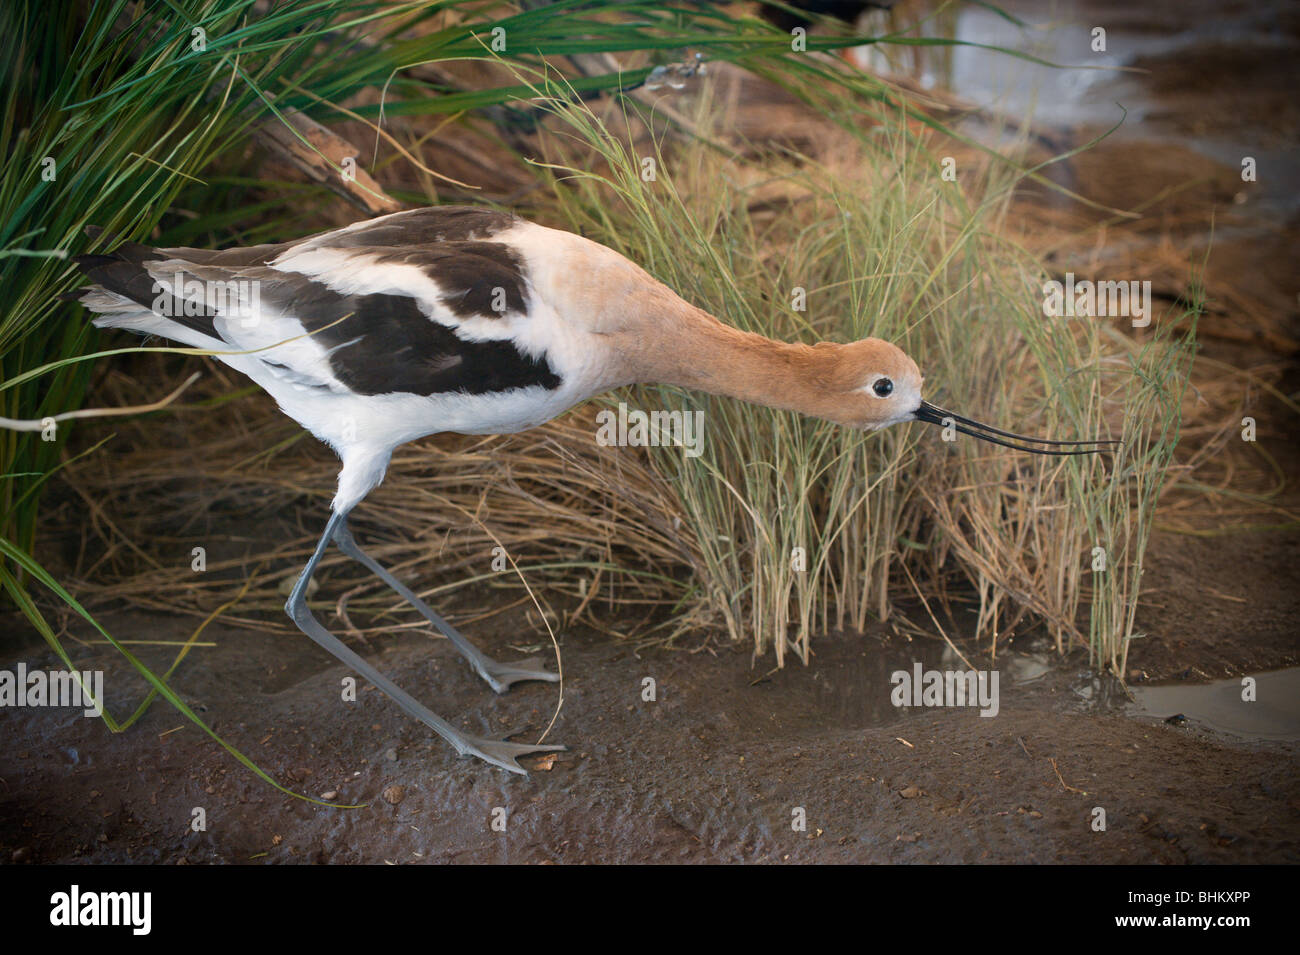 An American Avocet is on display at the Joe Skeen Visitor Center, Bitter Lake National Wildlife Refuge, Roswell, New Mexico. Stock Photo